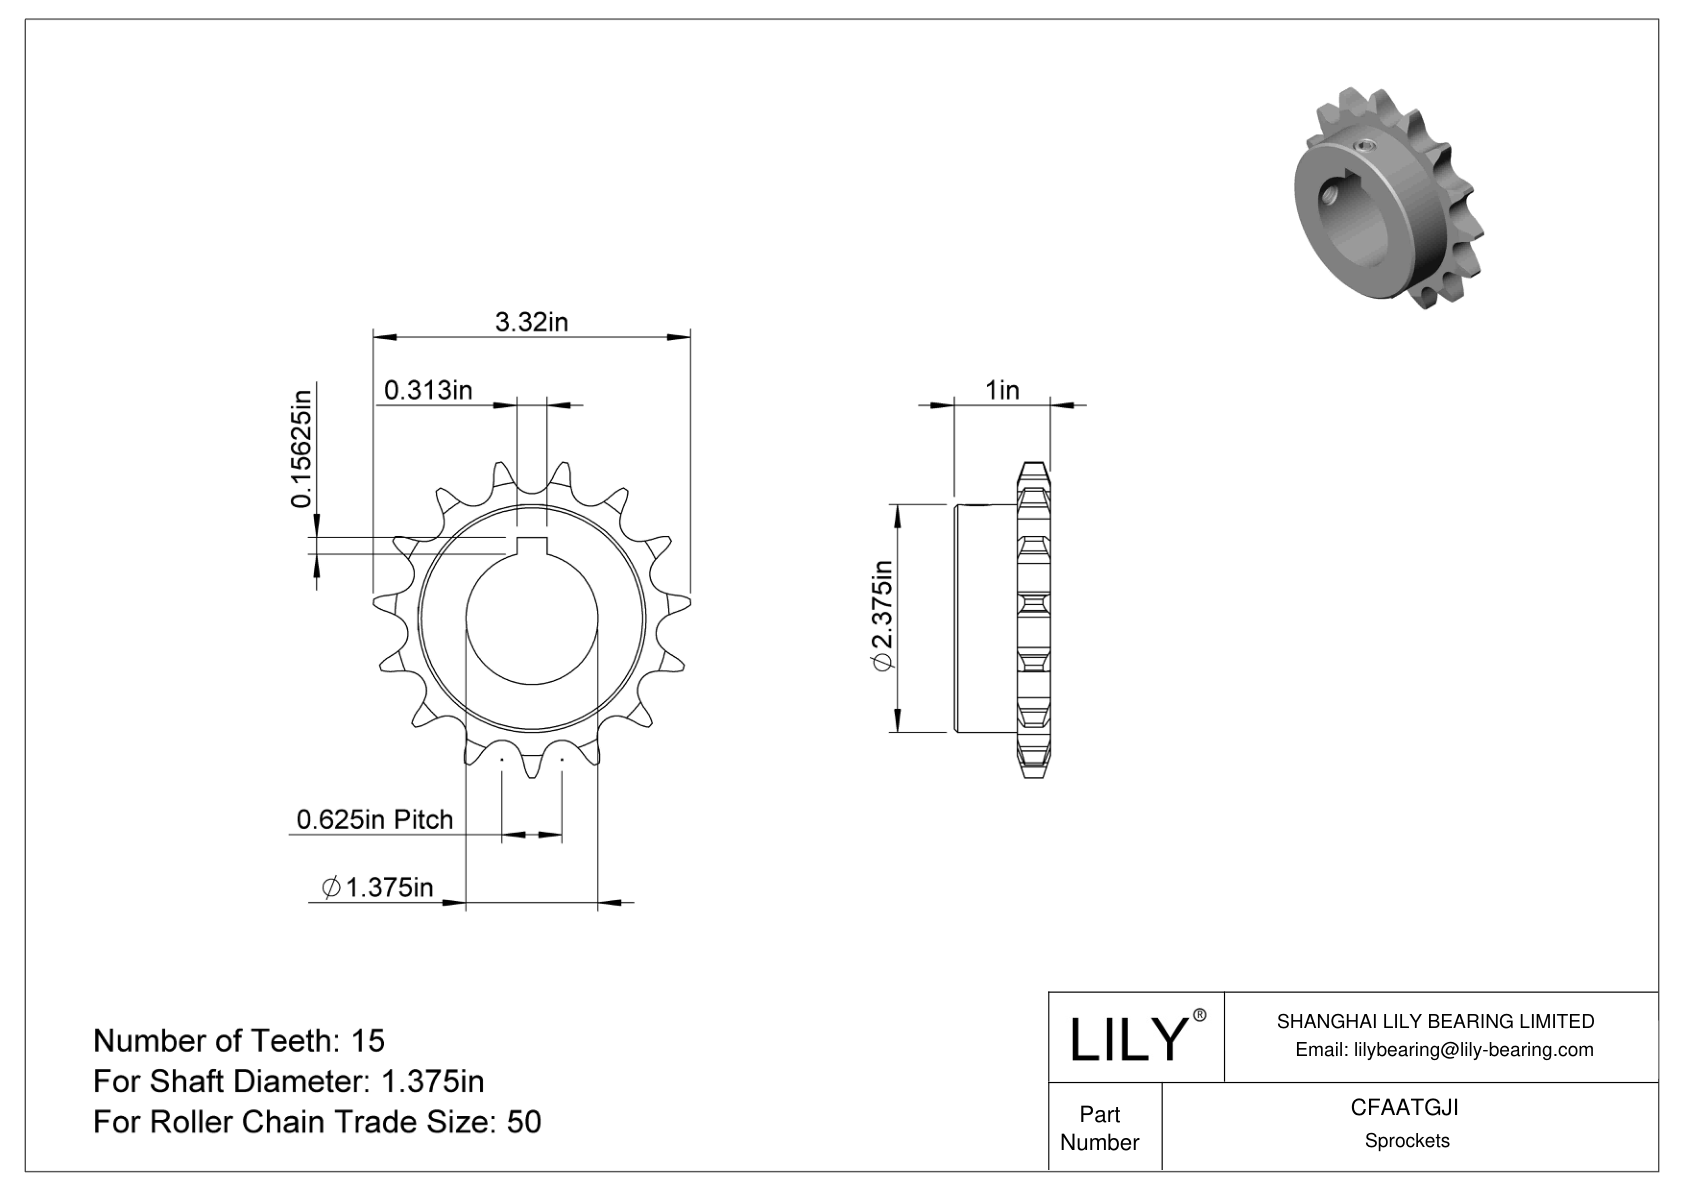 CFAATGJI Wear-Resistant Sprockets for ANSI Roller Chain cad drawing